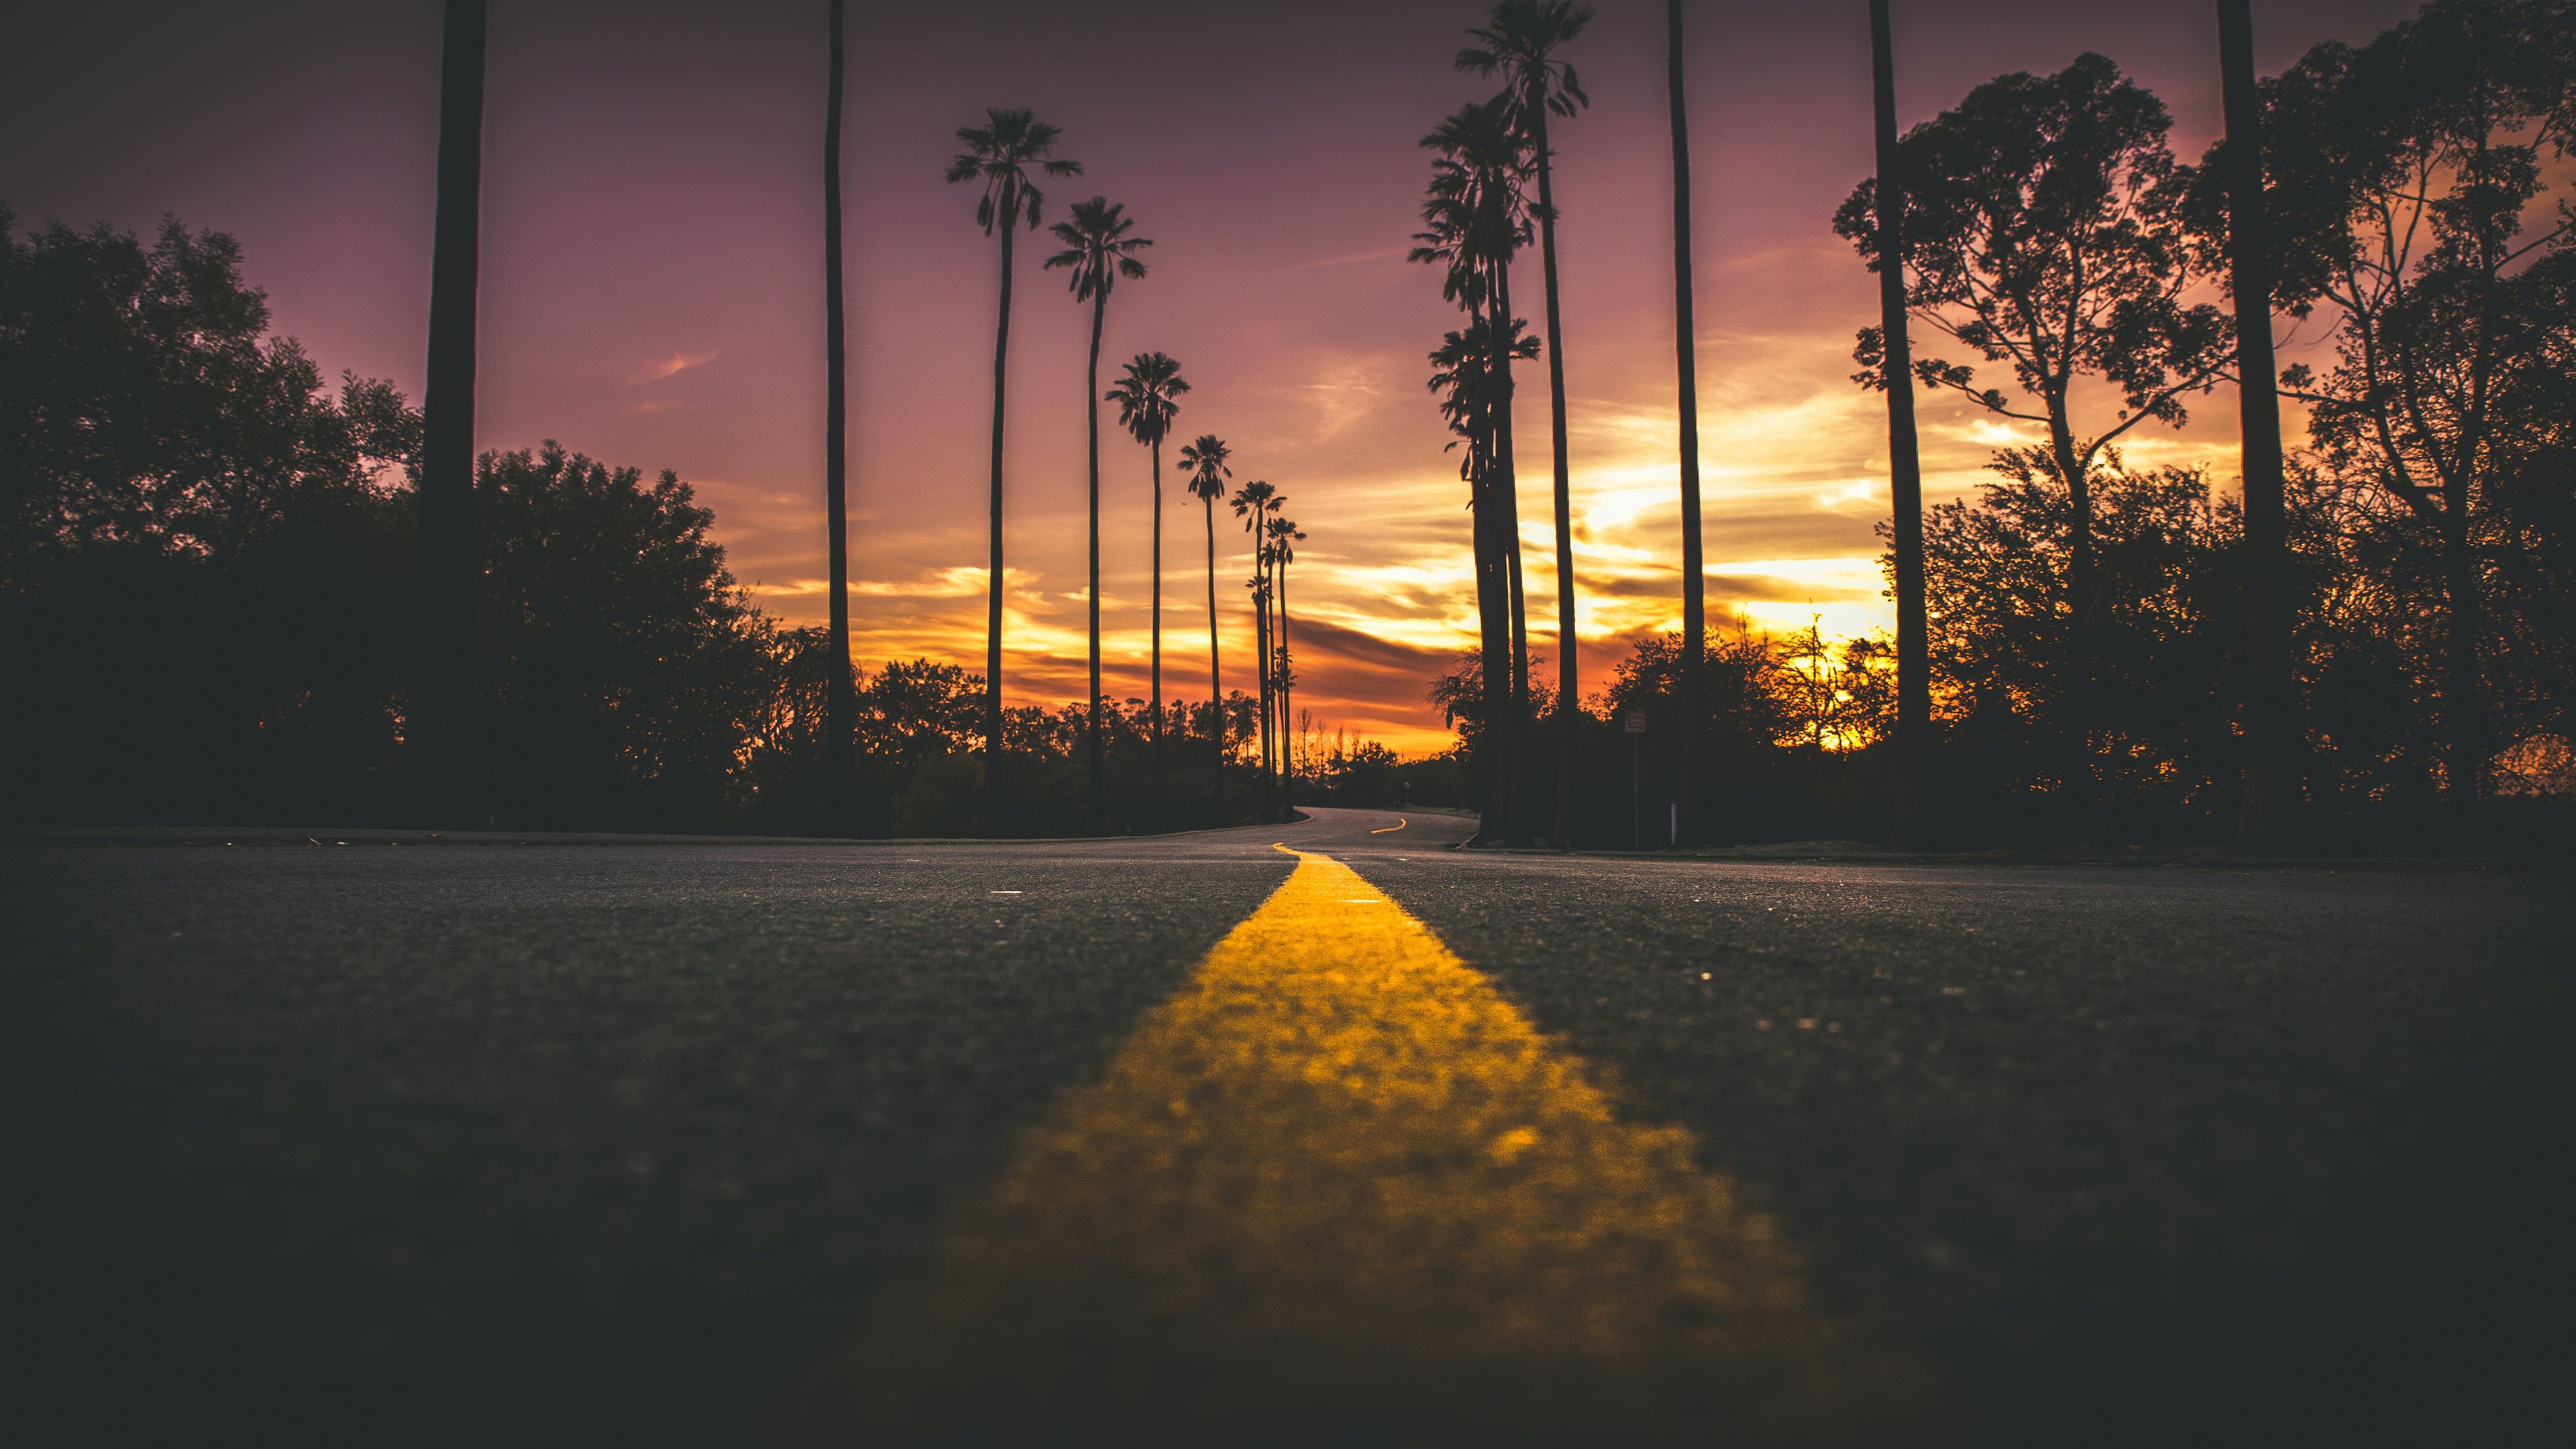 Road In City During Sunset 4K HD Wallpaper